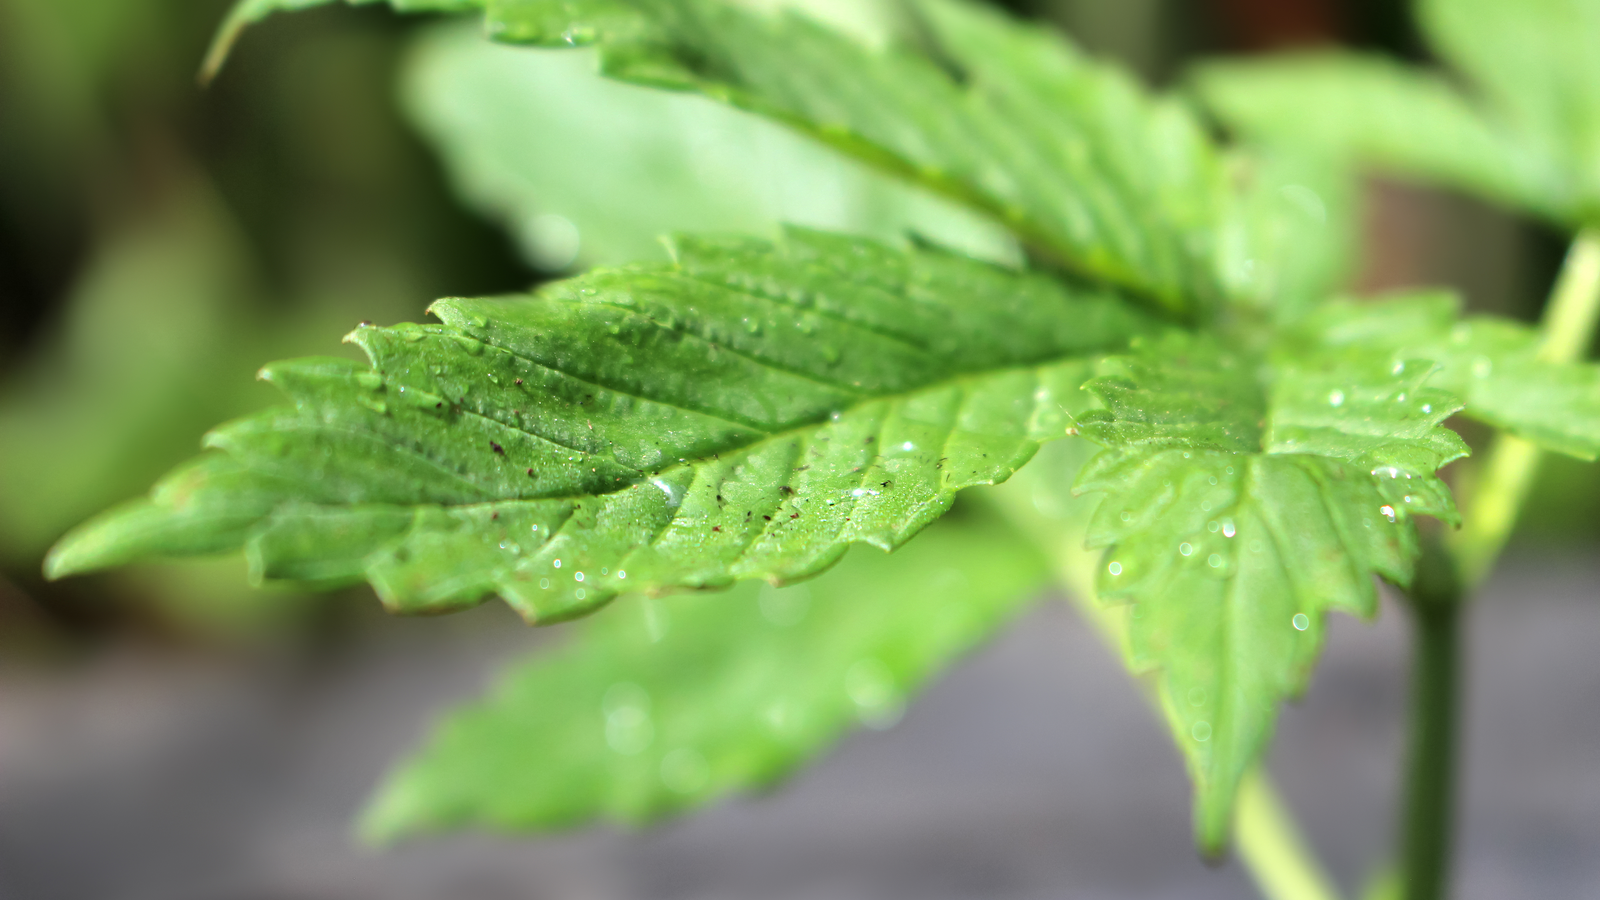 Cannabis Stocks. Young green medicinal marijuana plant in a pot after a rain fall shallow depth of field with focus on leaf; cannabis stocks